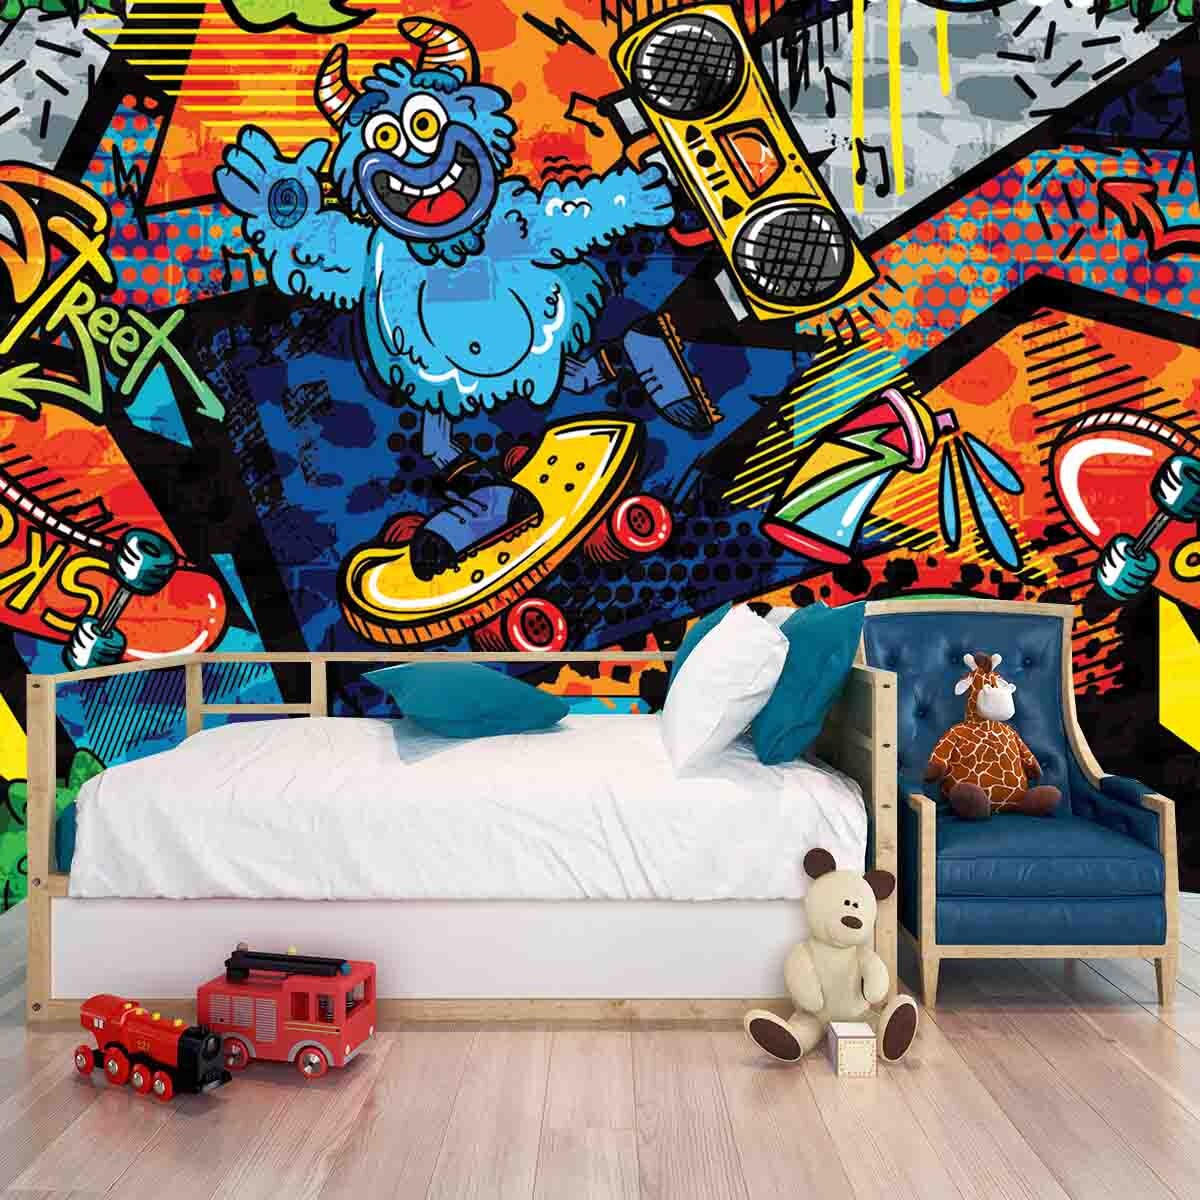 Abstract Bright Graffiti Pattern with Dino, Monsters, Bricks, Paint Drips, Words in Graffiti Style Wallpaper Boys Bedroom Mural